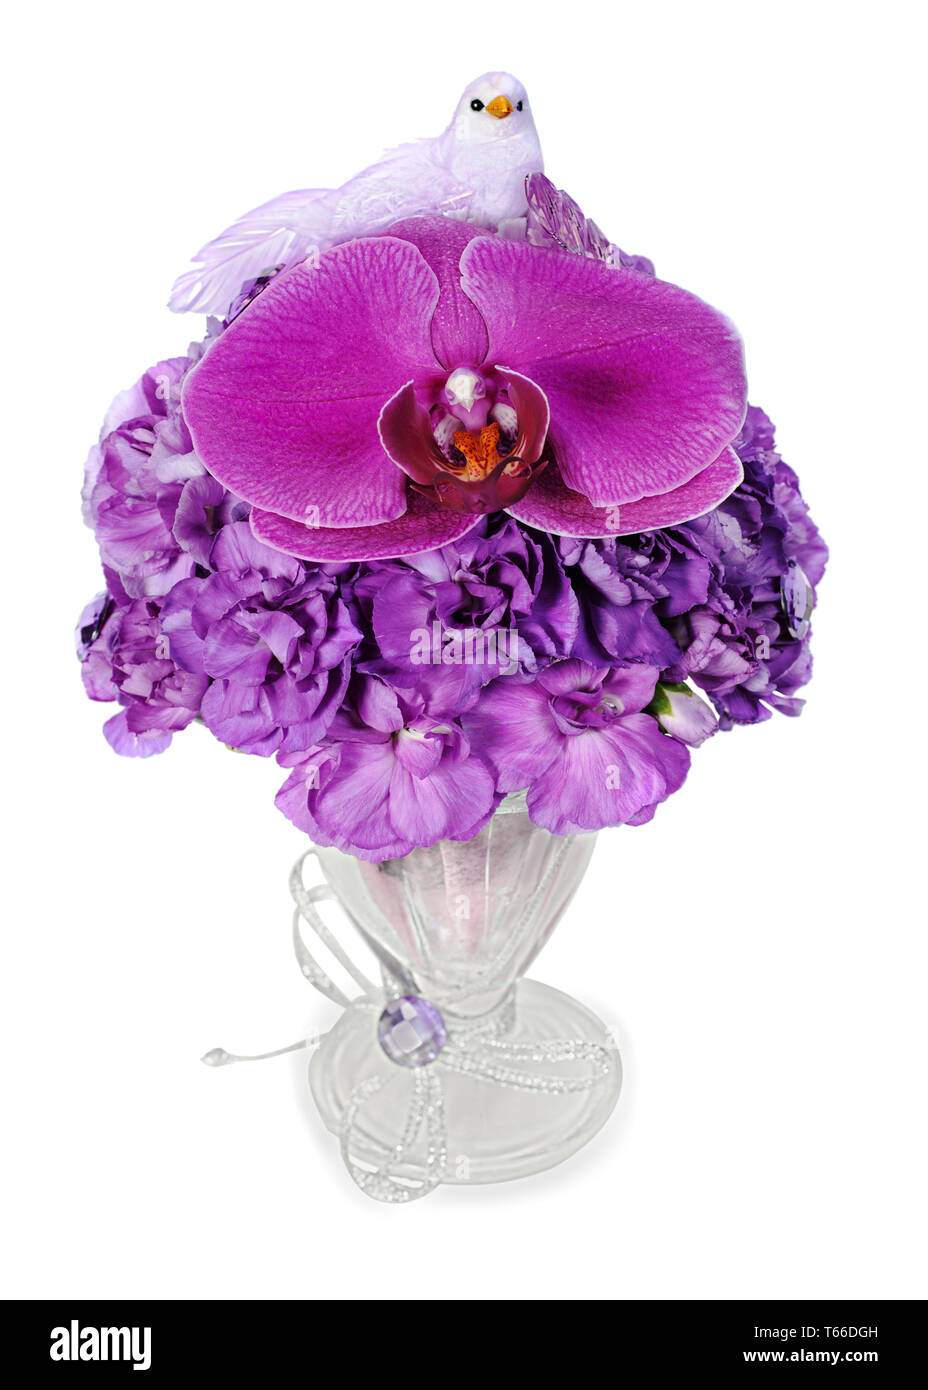 colorful arrangement of orchids, hydrangeas and bl Stock Photo